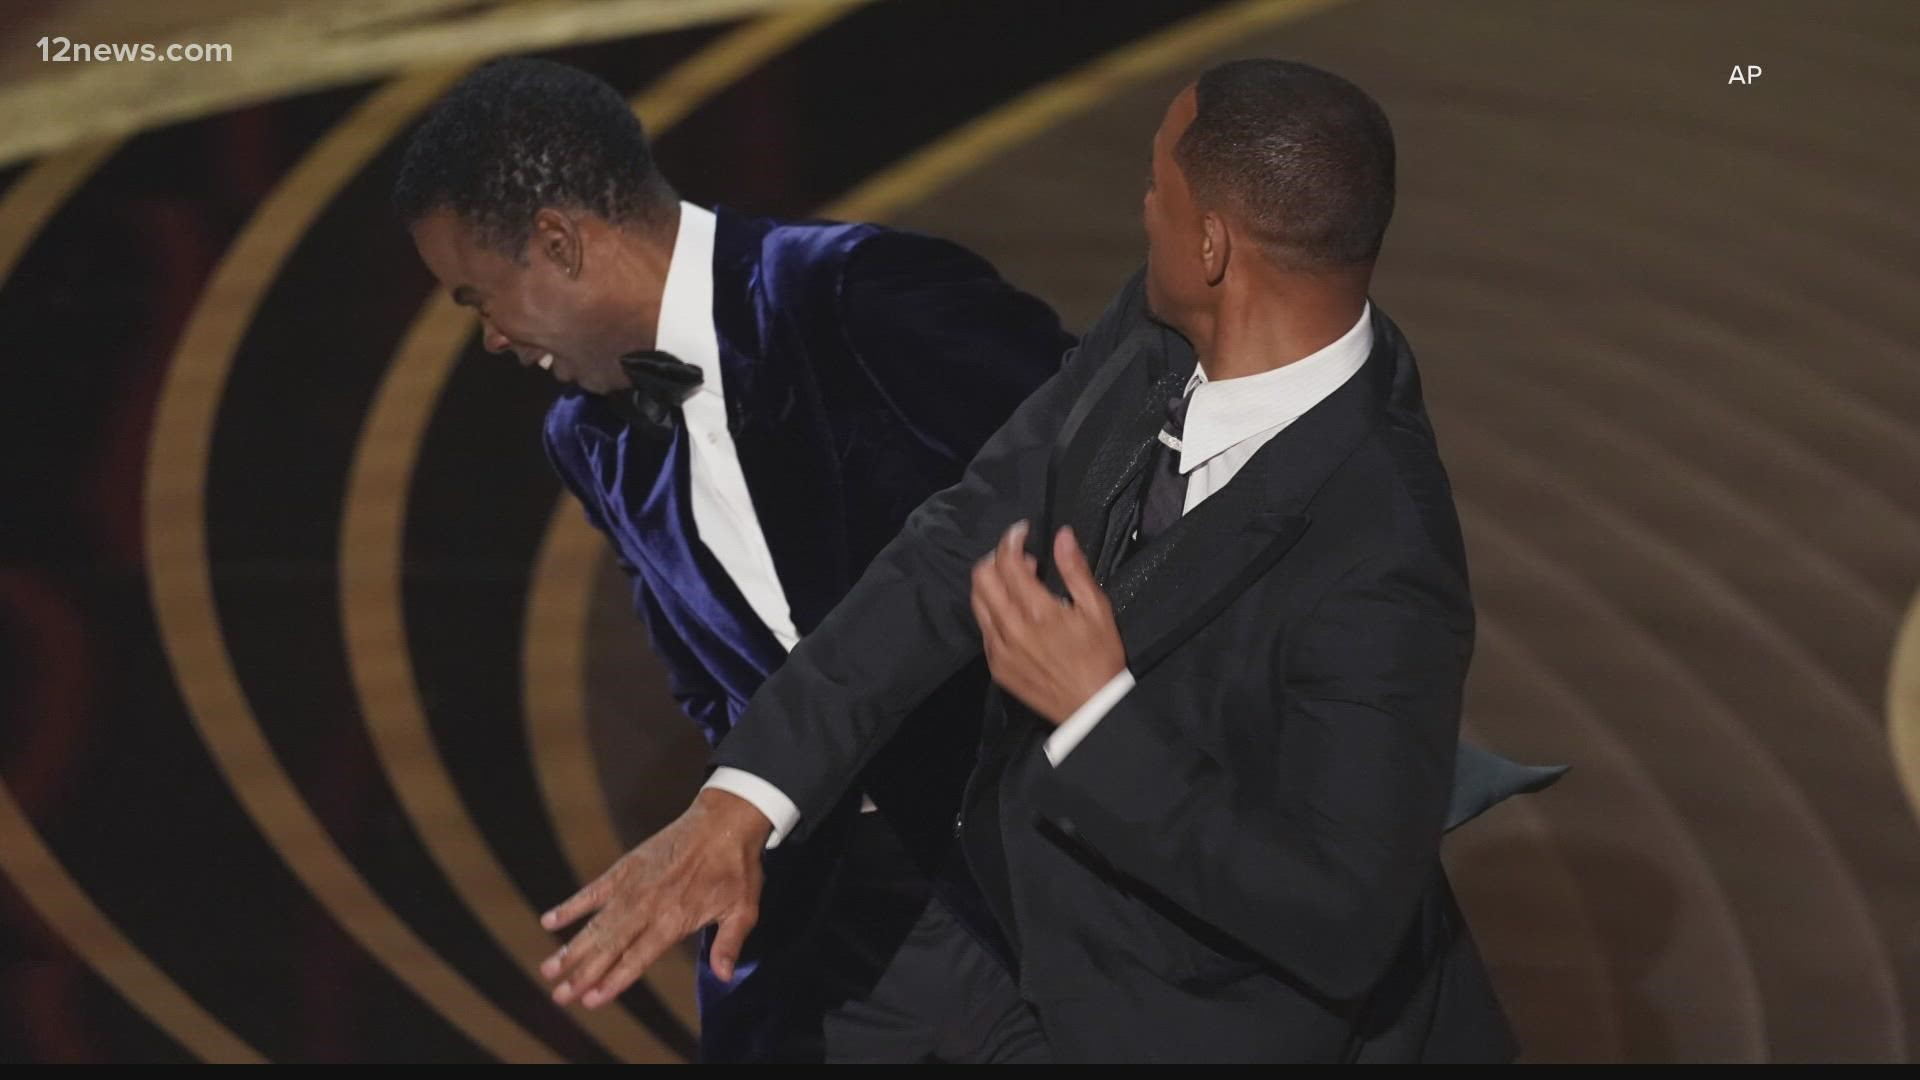 This is the Oscars moment everyone is going to be talking about.